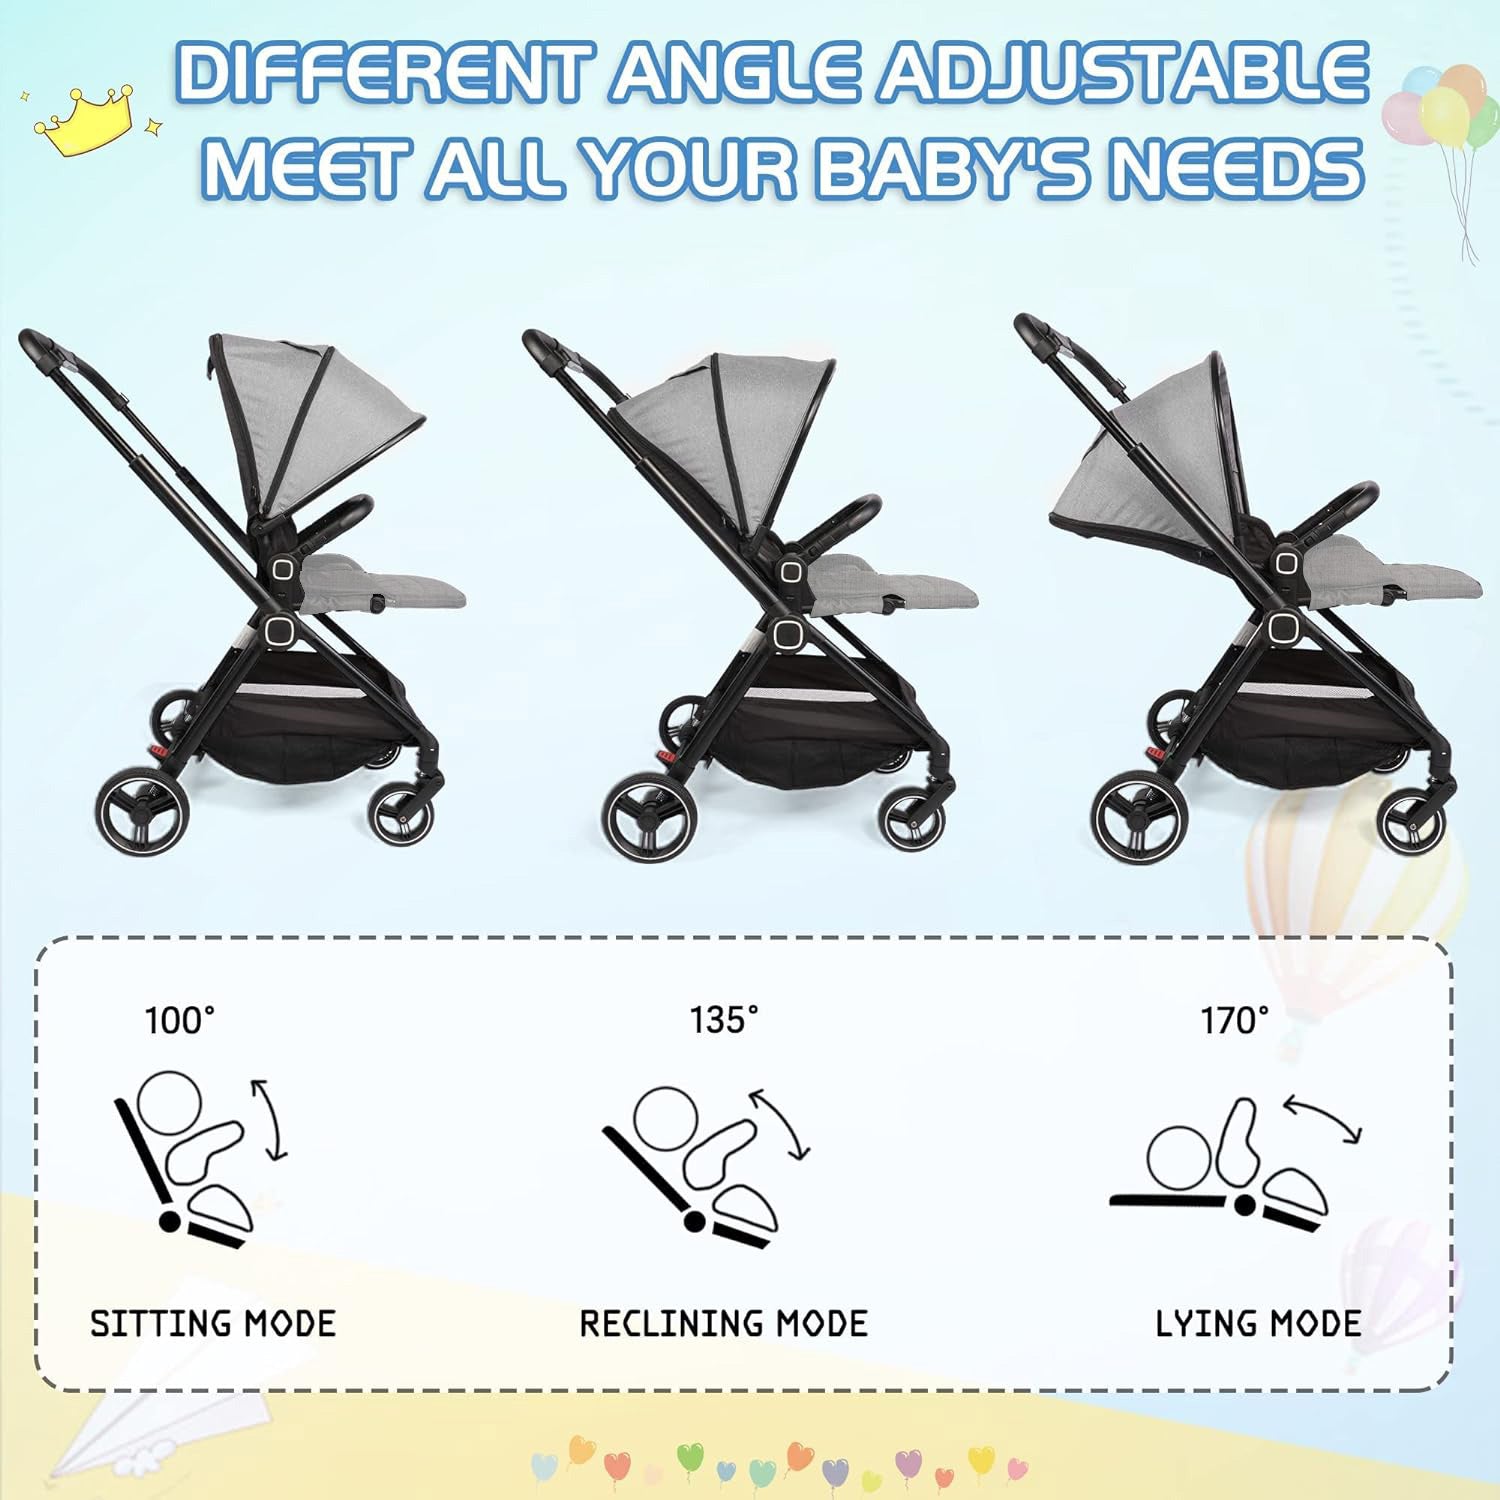 2 in 1 Convertible Baby Stroller Carriage Bassinet to Stroller Adjustable Footrest & Canopy, 5-Point Seat Belt, Lightweight Aluminum Frame, Gray